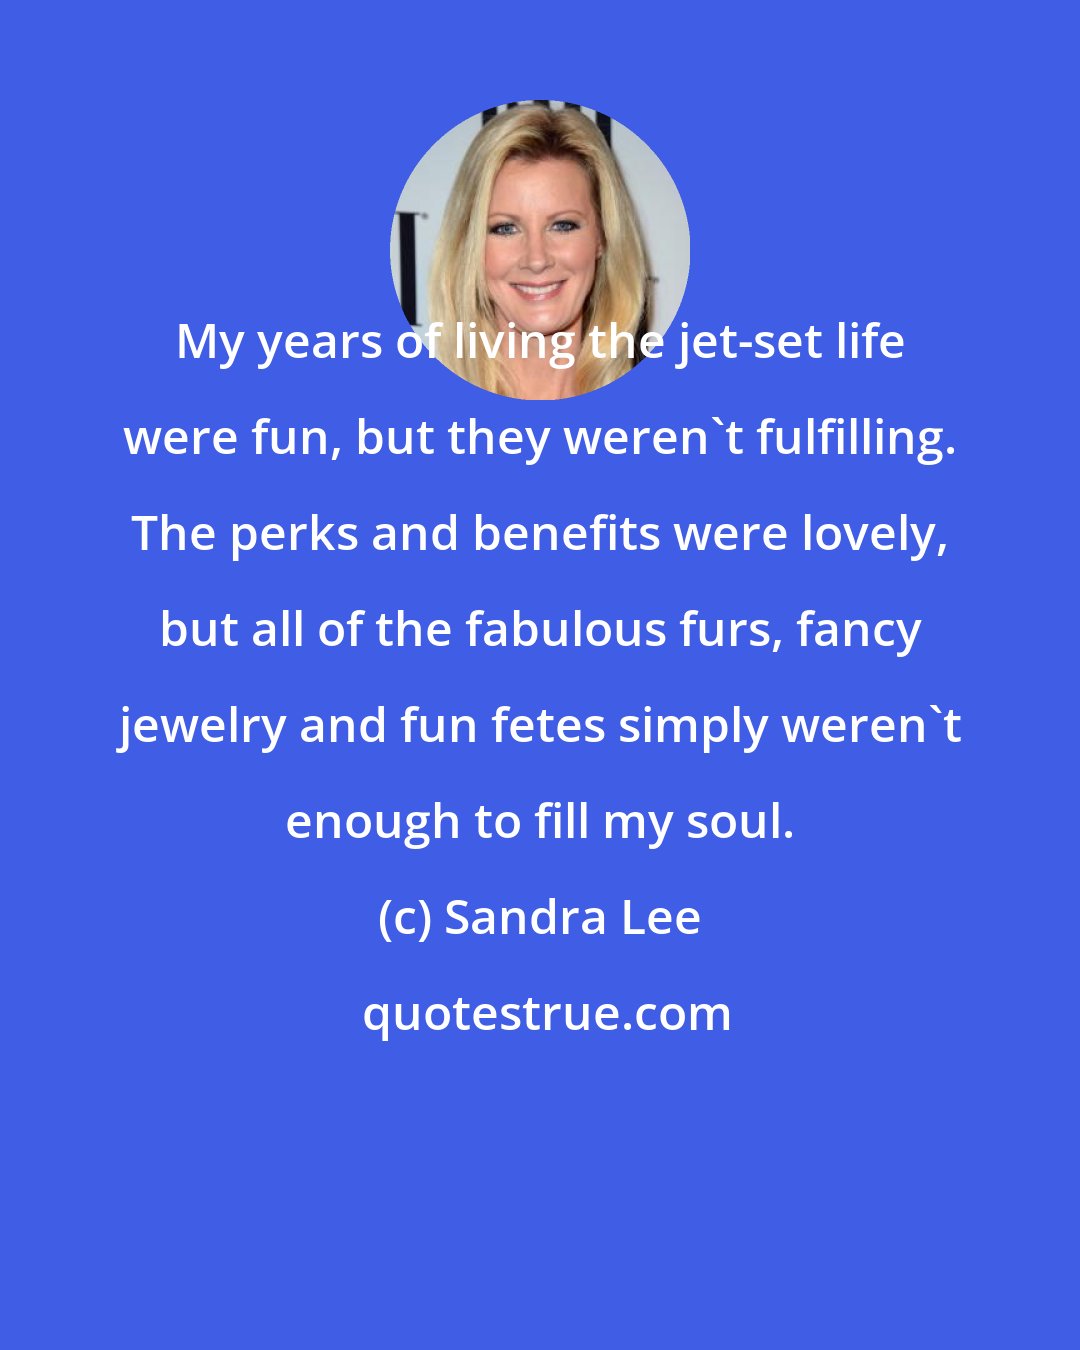 Sandra Lee: My years of living the jet-set life were fun, but they weren't fulfilling. The perks and benefits were lovely, but all of the fabulous furs, fancy jewelry and fun fetes simply weren't enough to fill my soul.